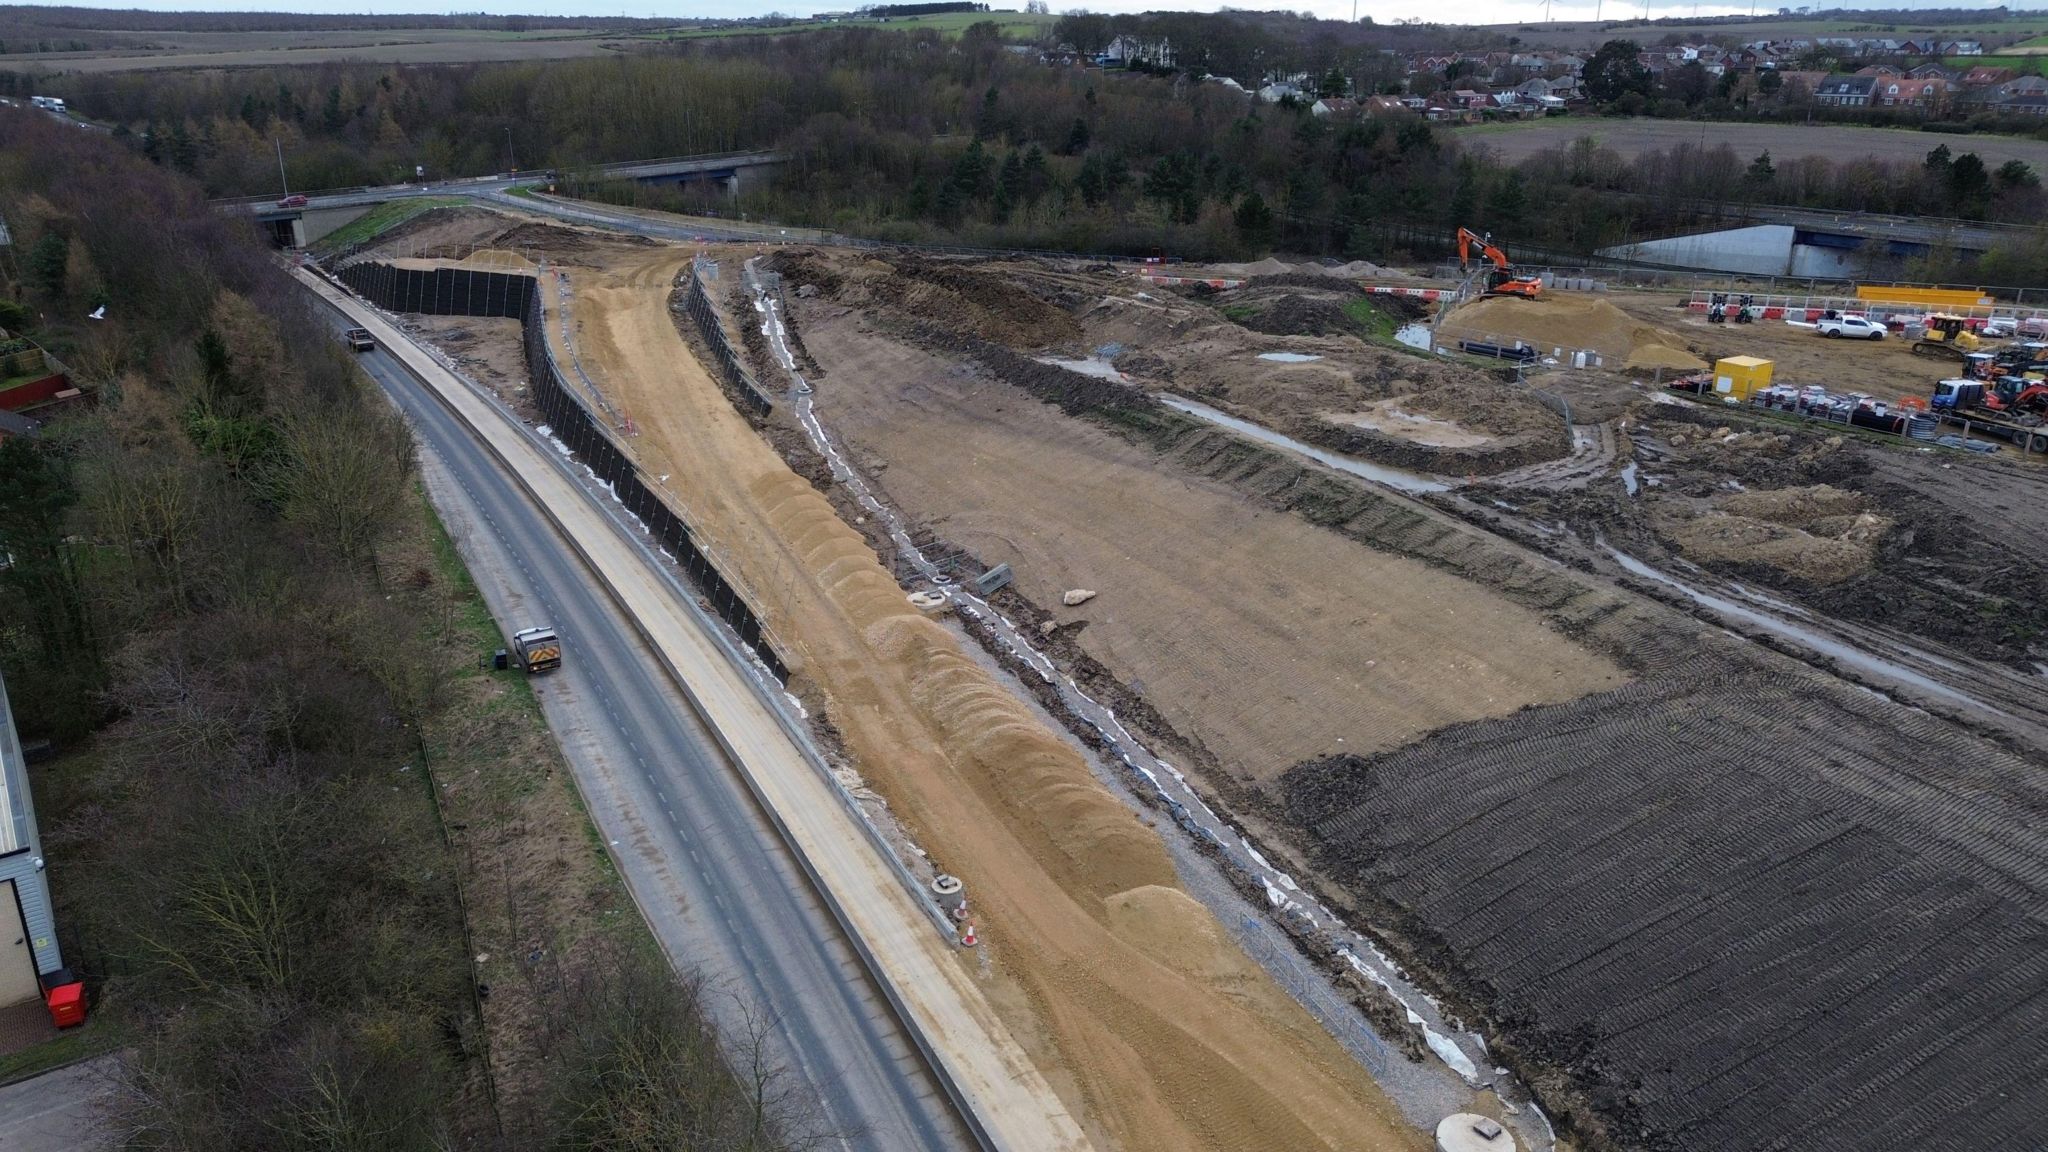 Road works taking place on the A19